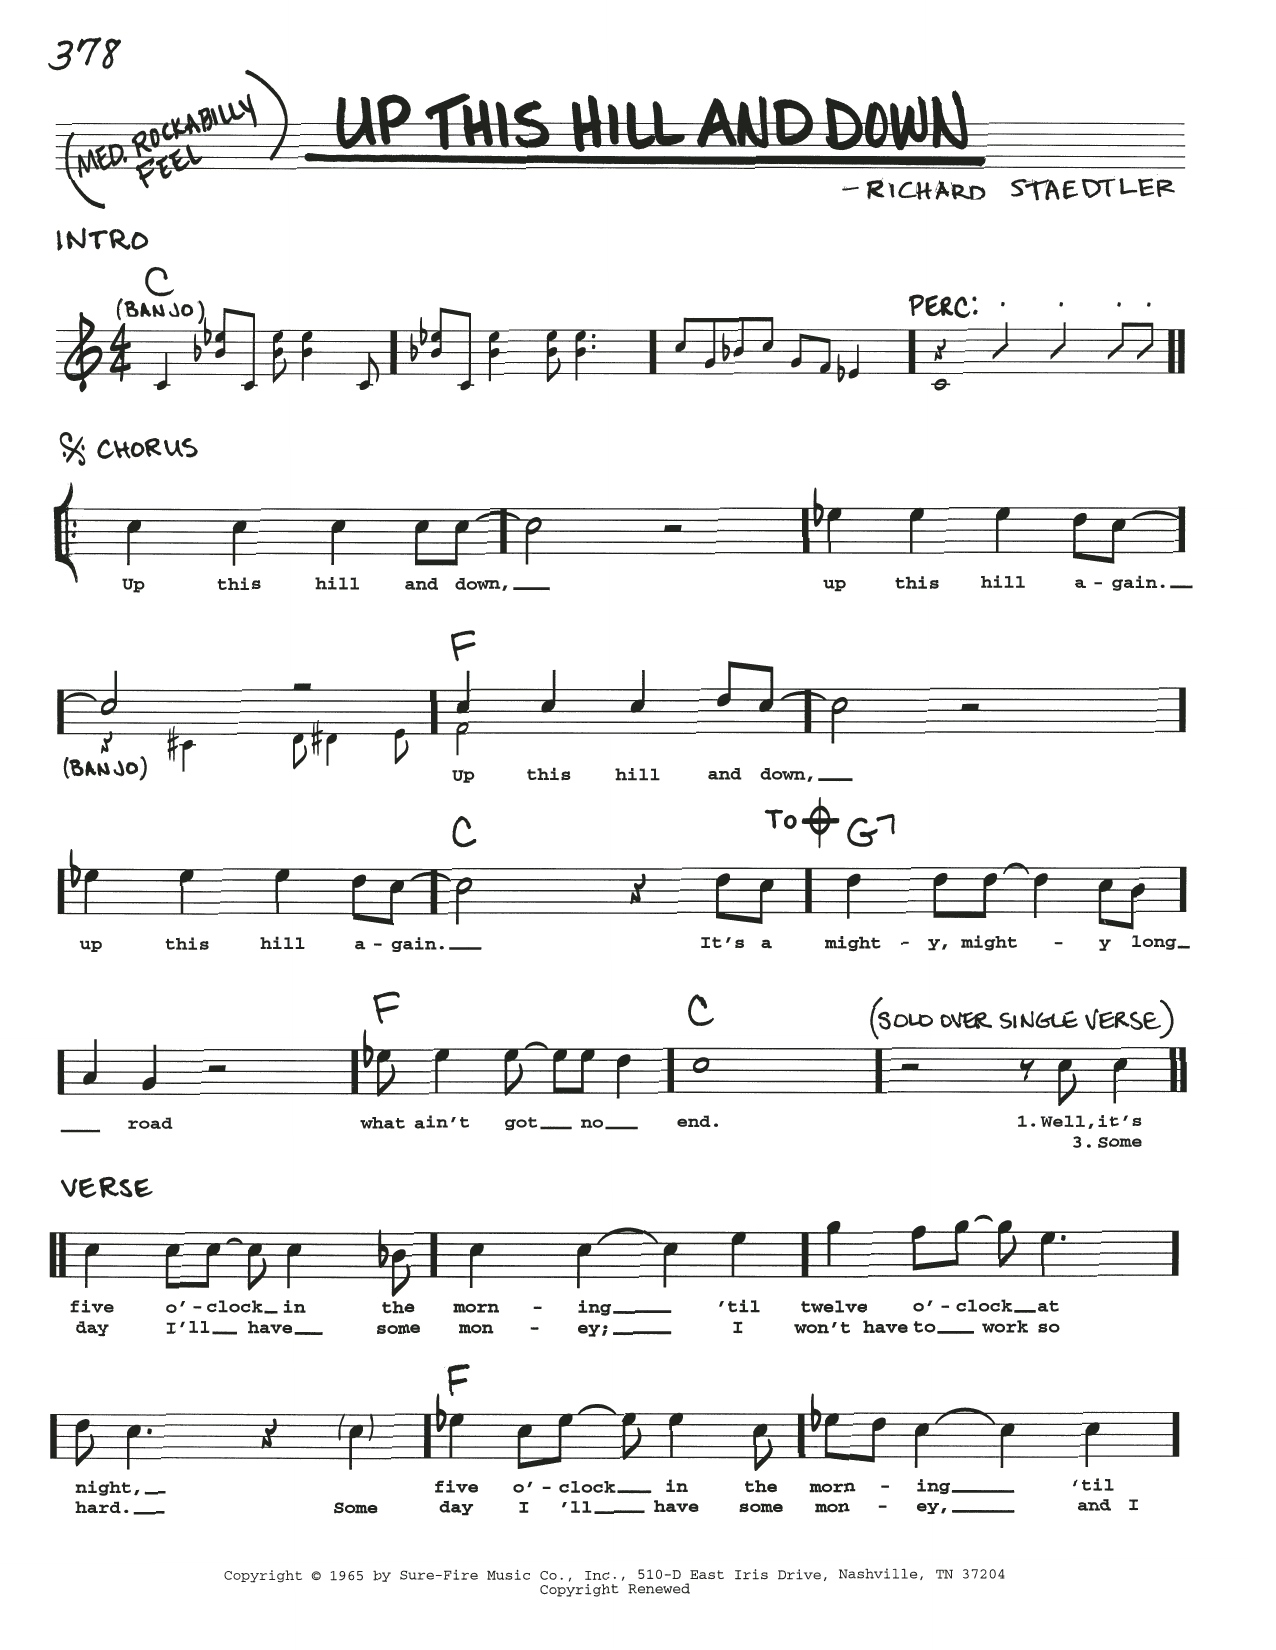 Richard Staedtler Up This Hill And Down sheet music notes and chords. Download Printable PDF.